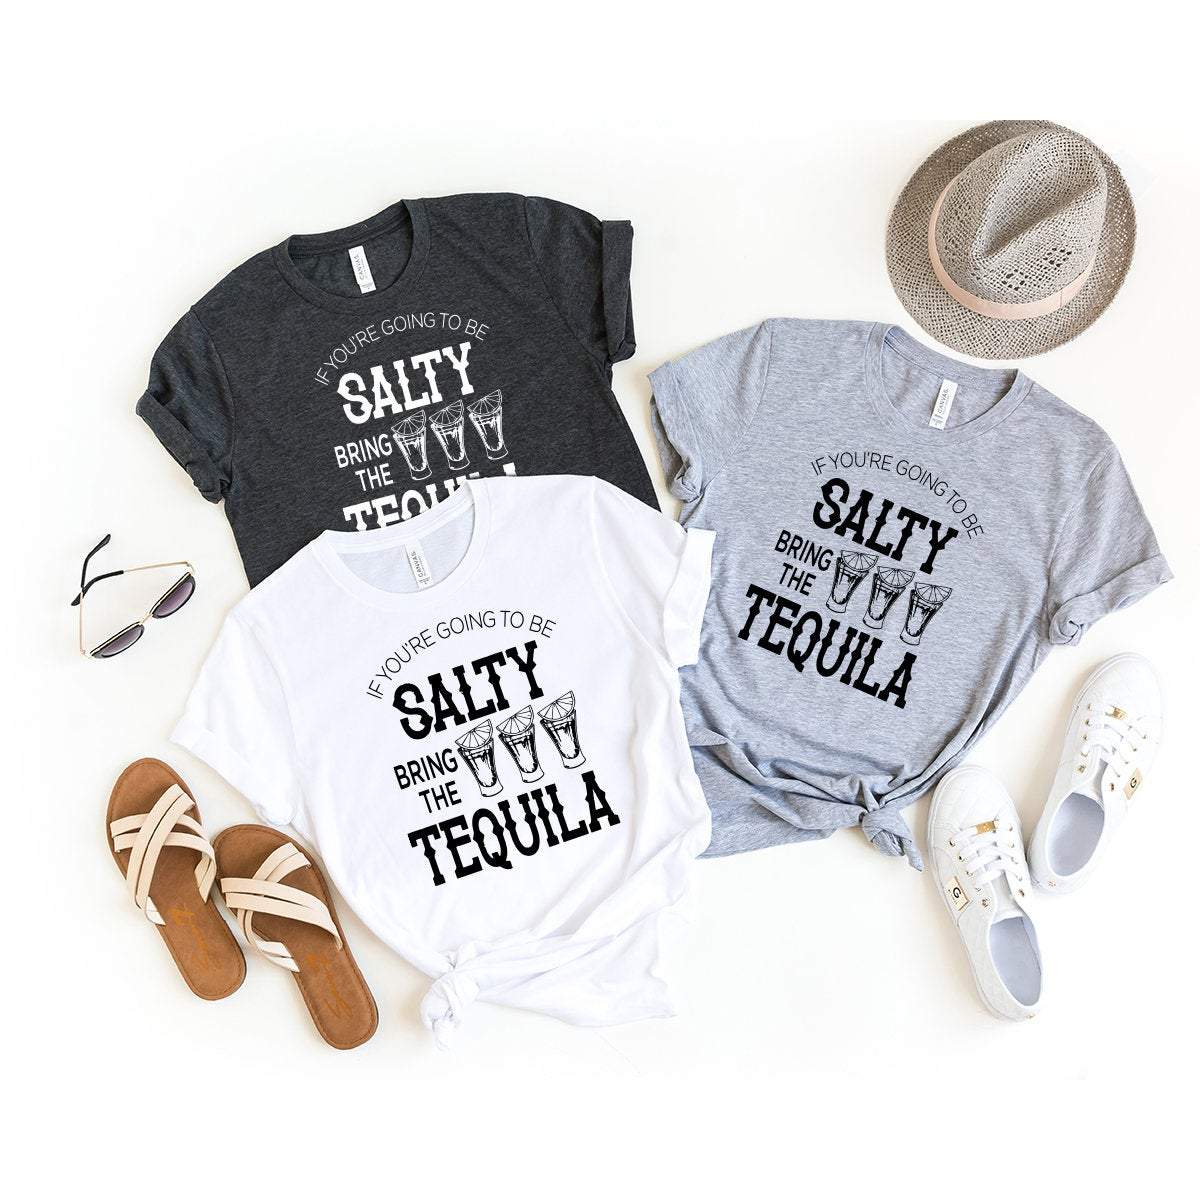 Tequila Shirt, Drinking Shirts, Drinking Friends Gift, Funny Drinking Shirts, If You Are Going To Be Salty Bring The Tequila Shirt, Party - Fastdeliverytees.com